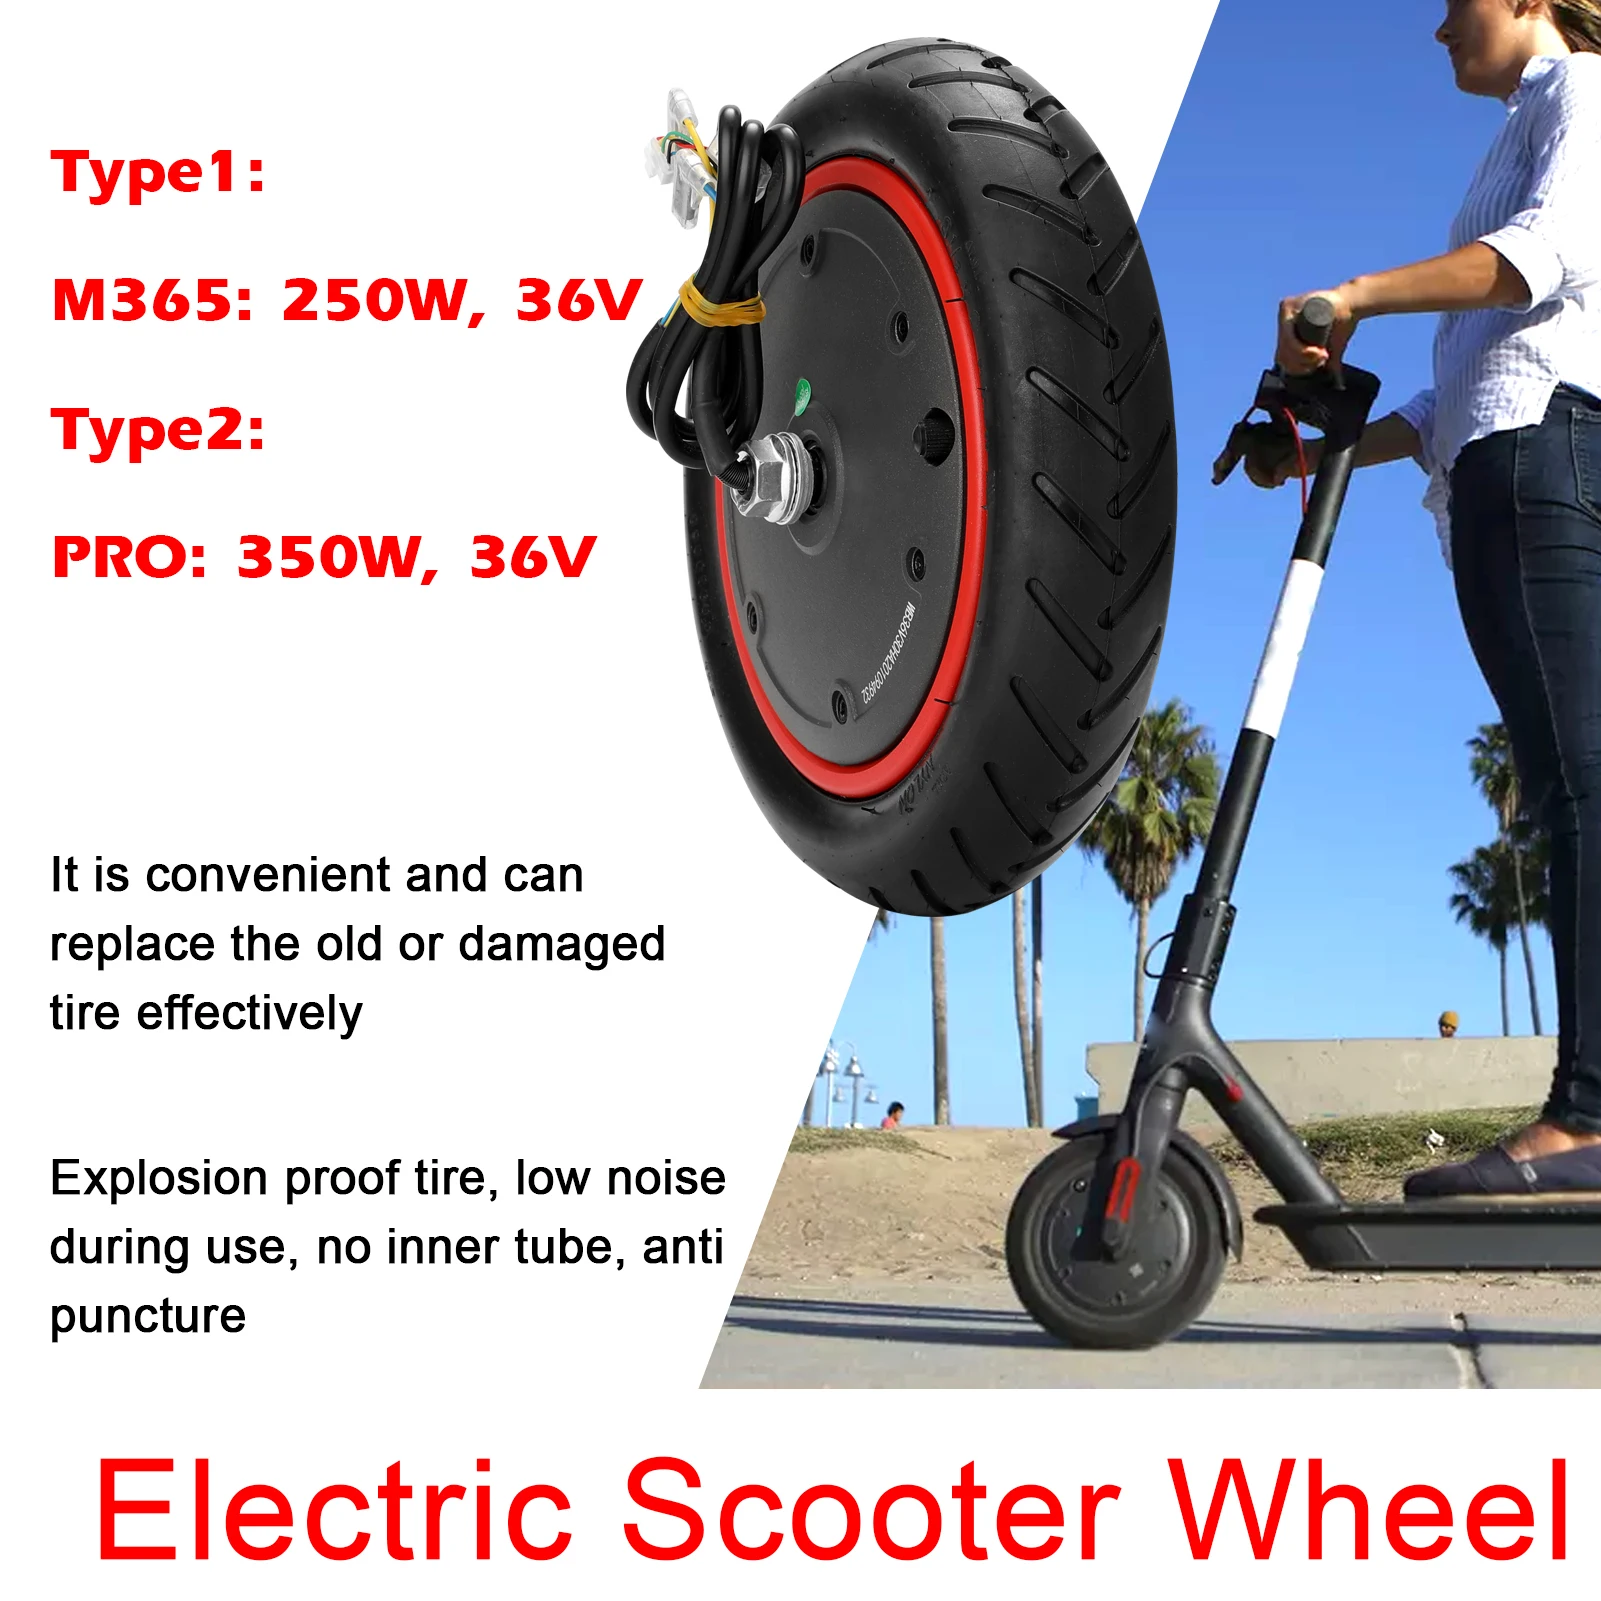 

36V 250W&350W For XiaoMi M365 Electric Scooter Motor Engine Wheel 8.5inch For XiaoMi M365Pro Electric Scooter Part